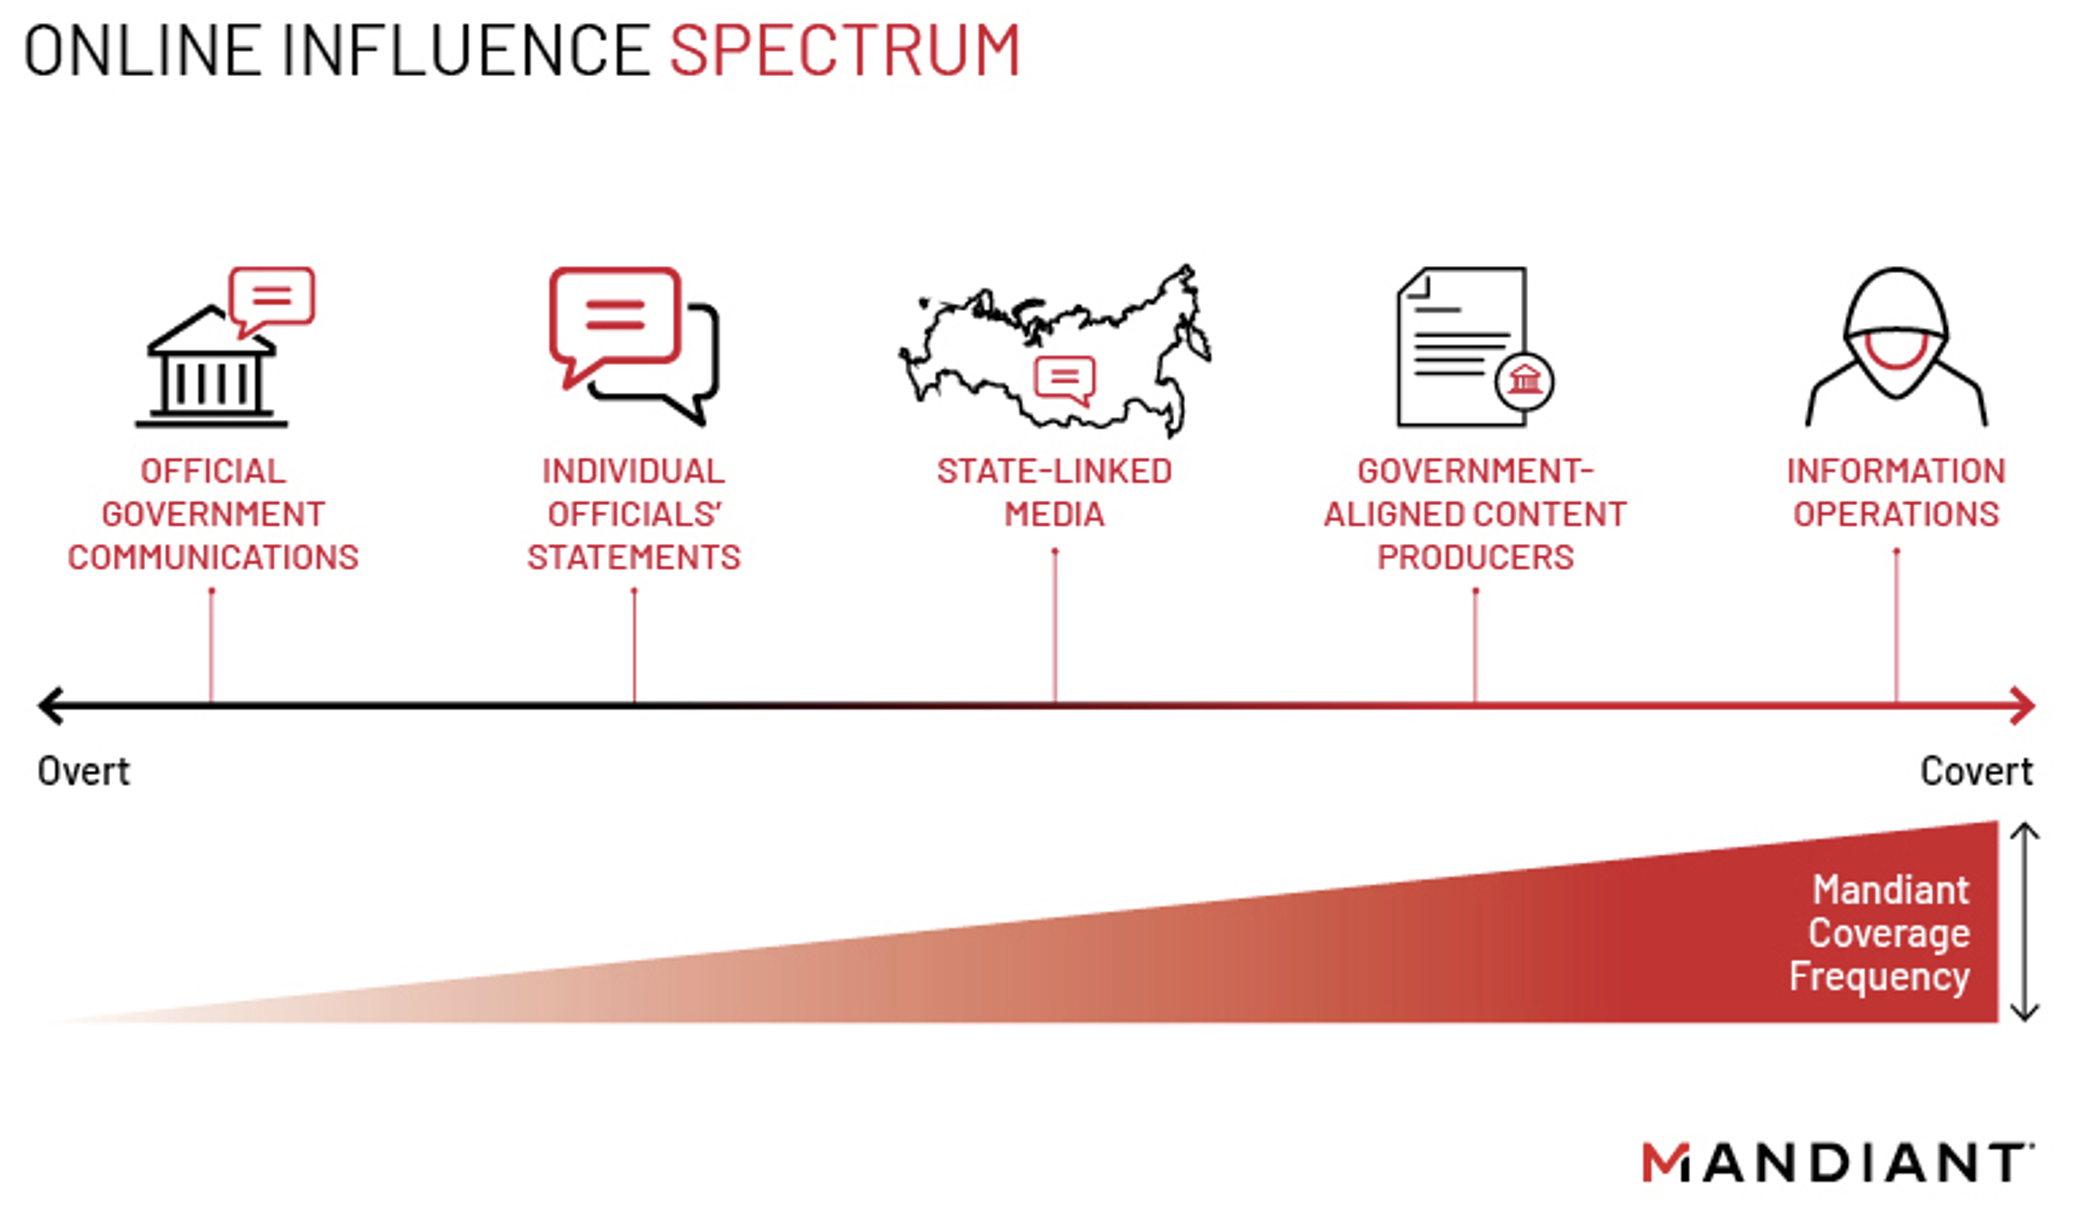 A sample of activity placed on the Online Influence Spectrum